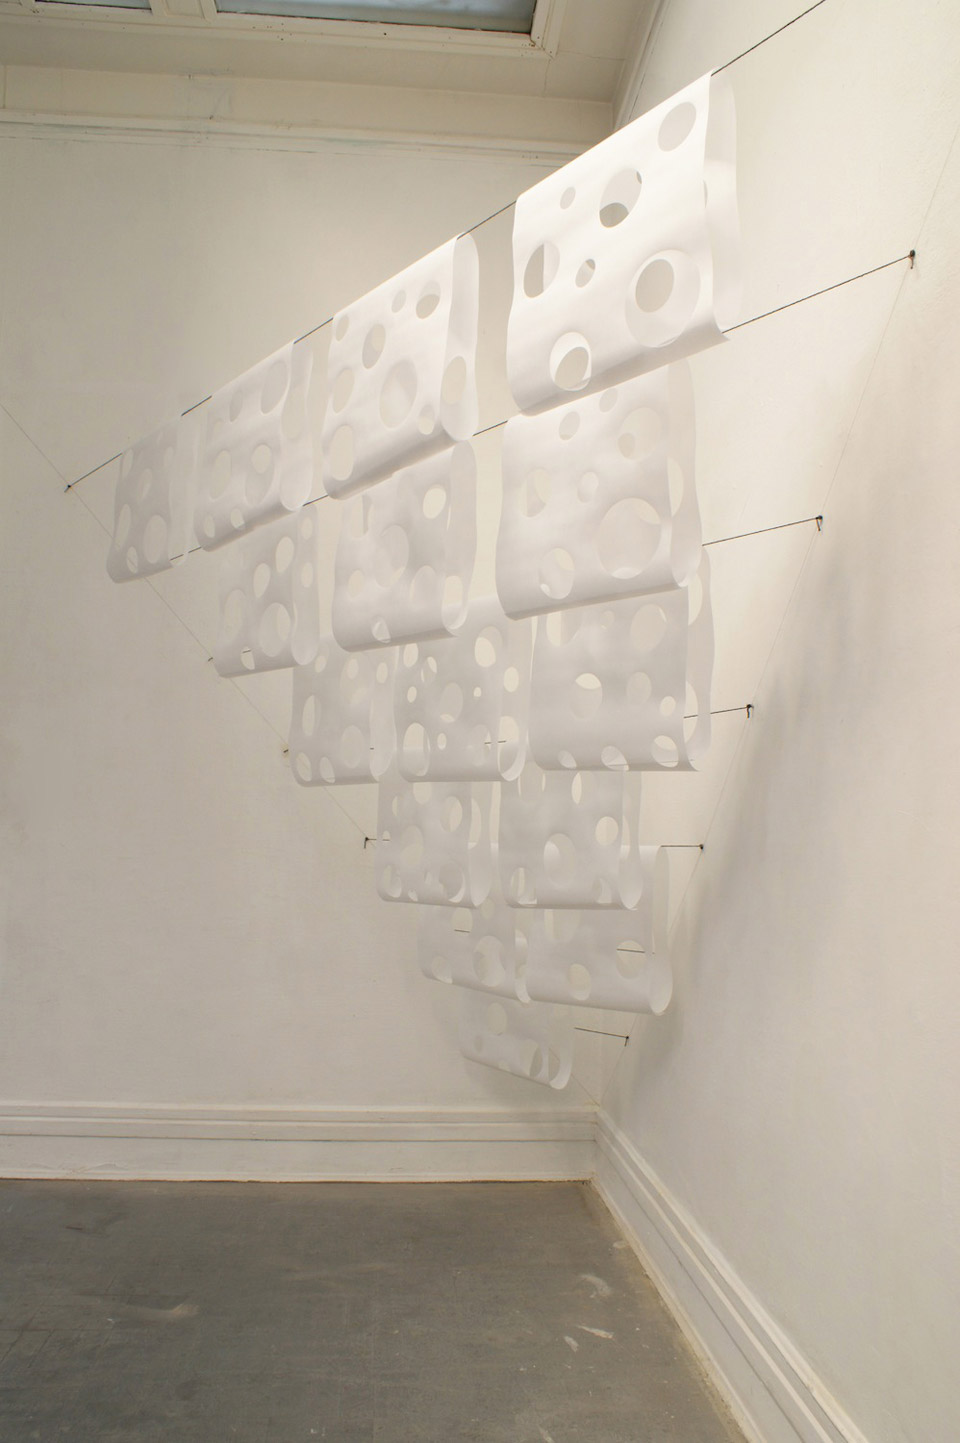 Untitled, 2012, Japanese paper hung on strings, paper sizes: 100 x 46 cm, total dimensions: 300 x 300 x 150 cm